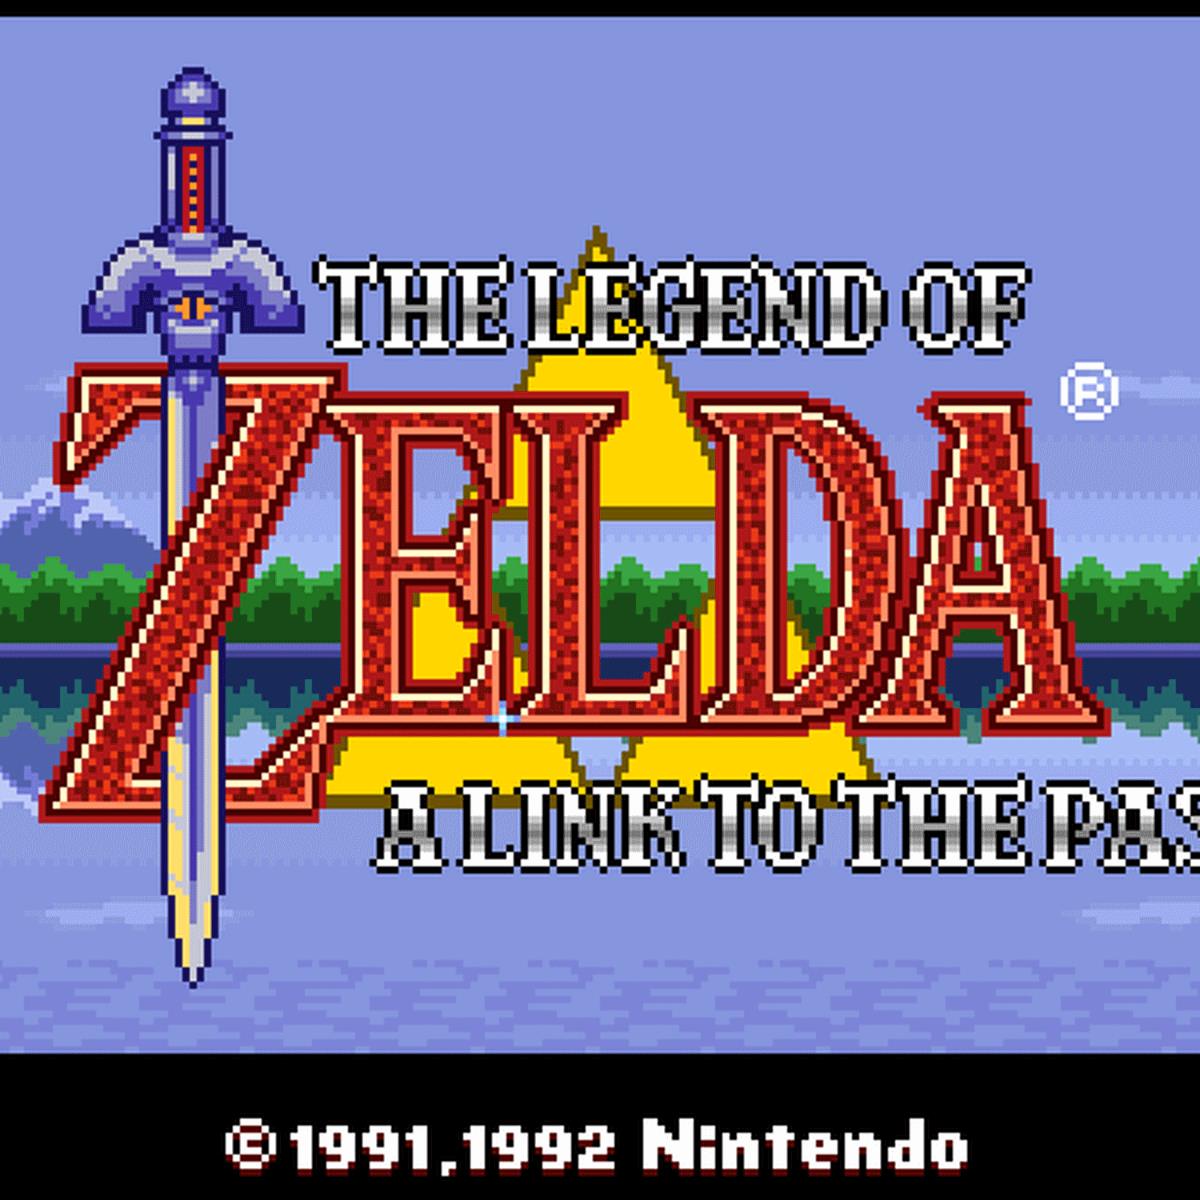 Zelda: A Link to the Past can now be compiled on Windows and Nintendo  Switch - Neowin